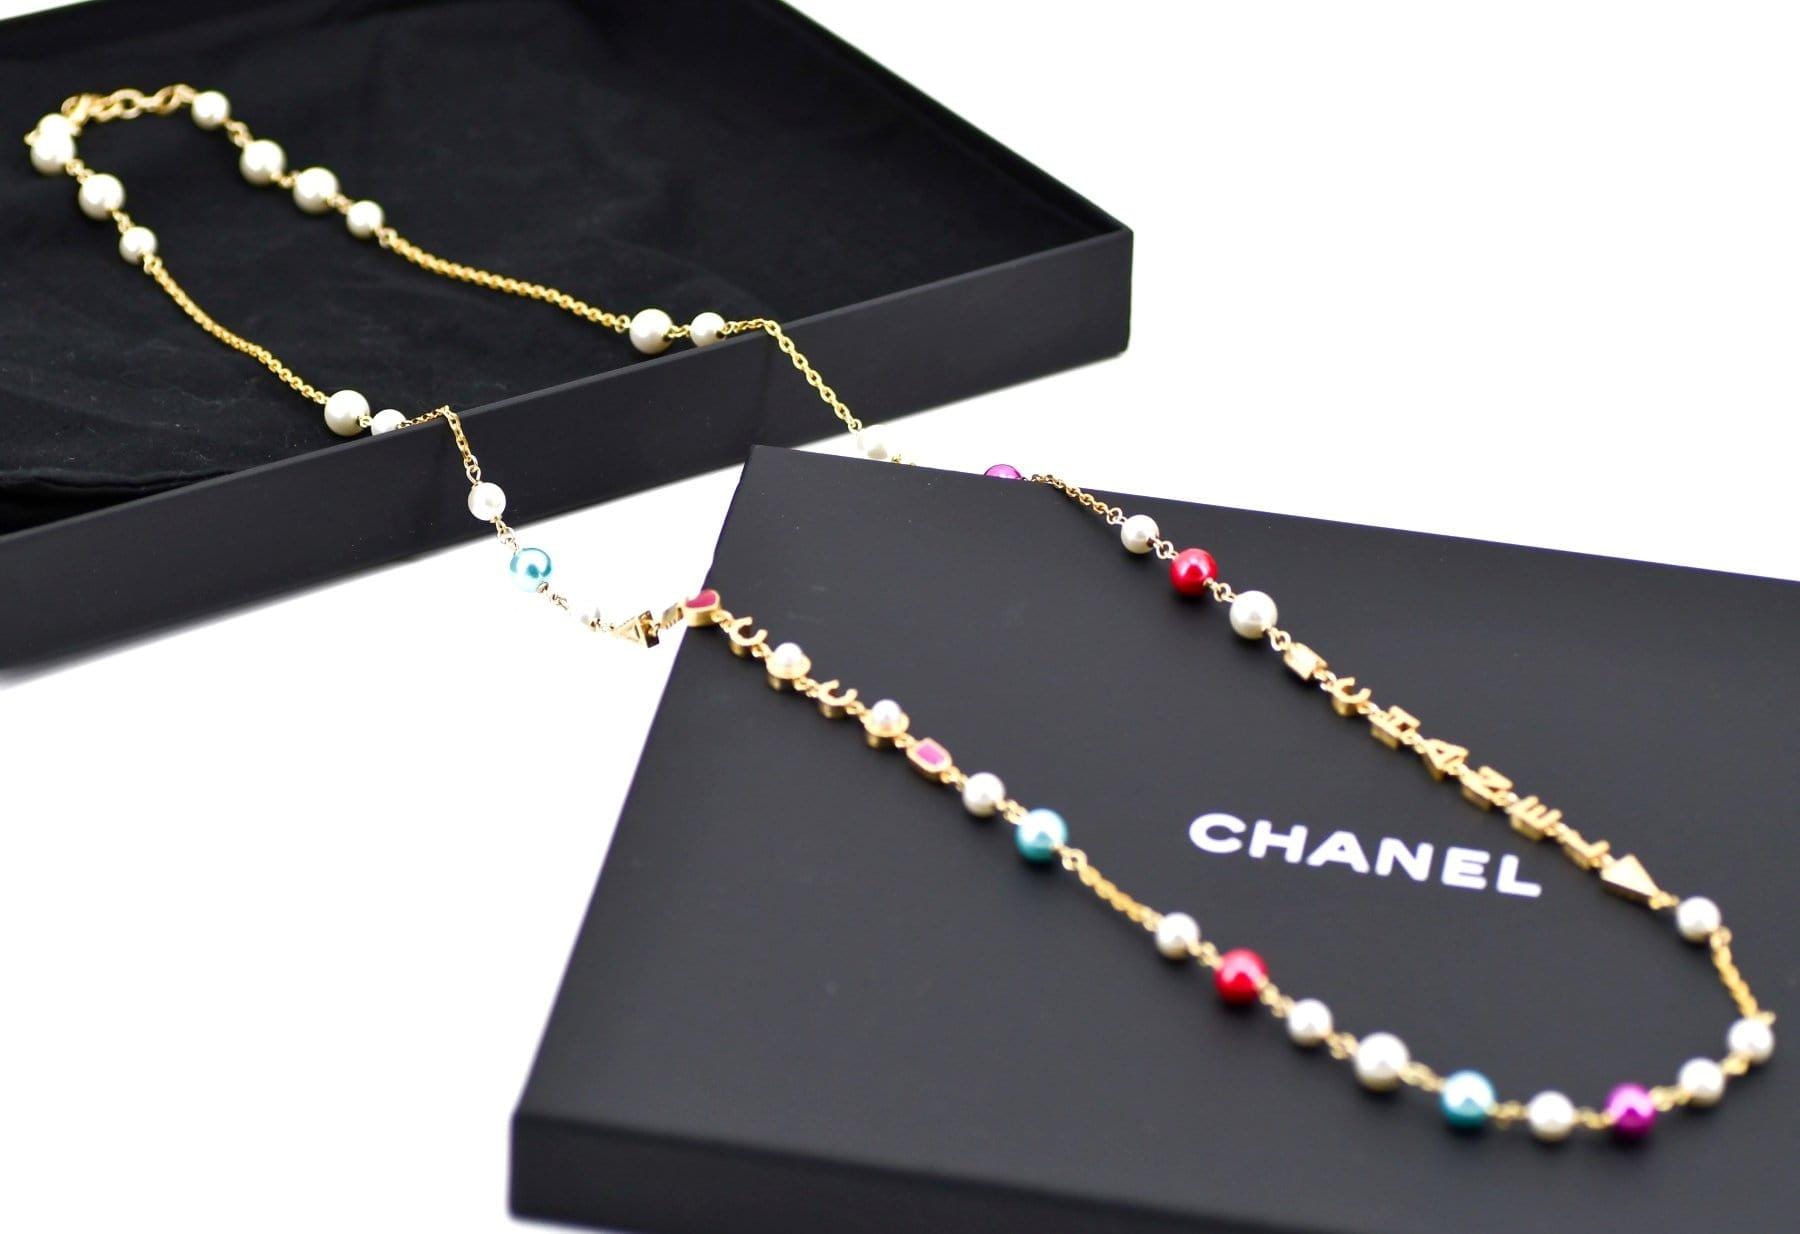 Chanel Chanel rainbow necklace